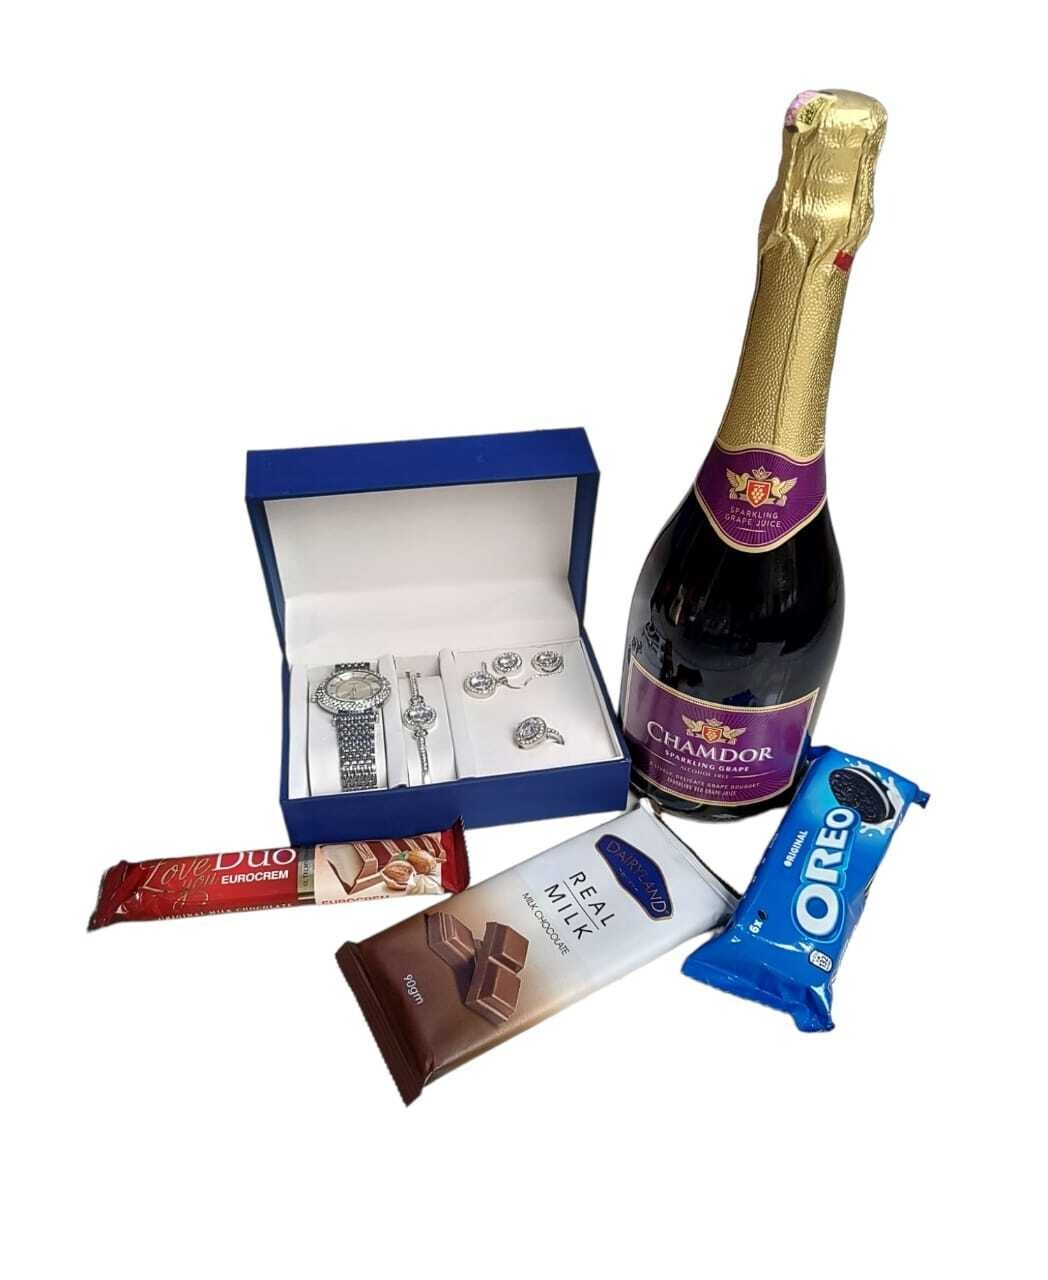 Gift pack exclusive ladies giftset, 3 chocolates & Chemdor sparkling water